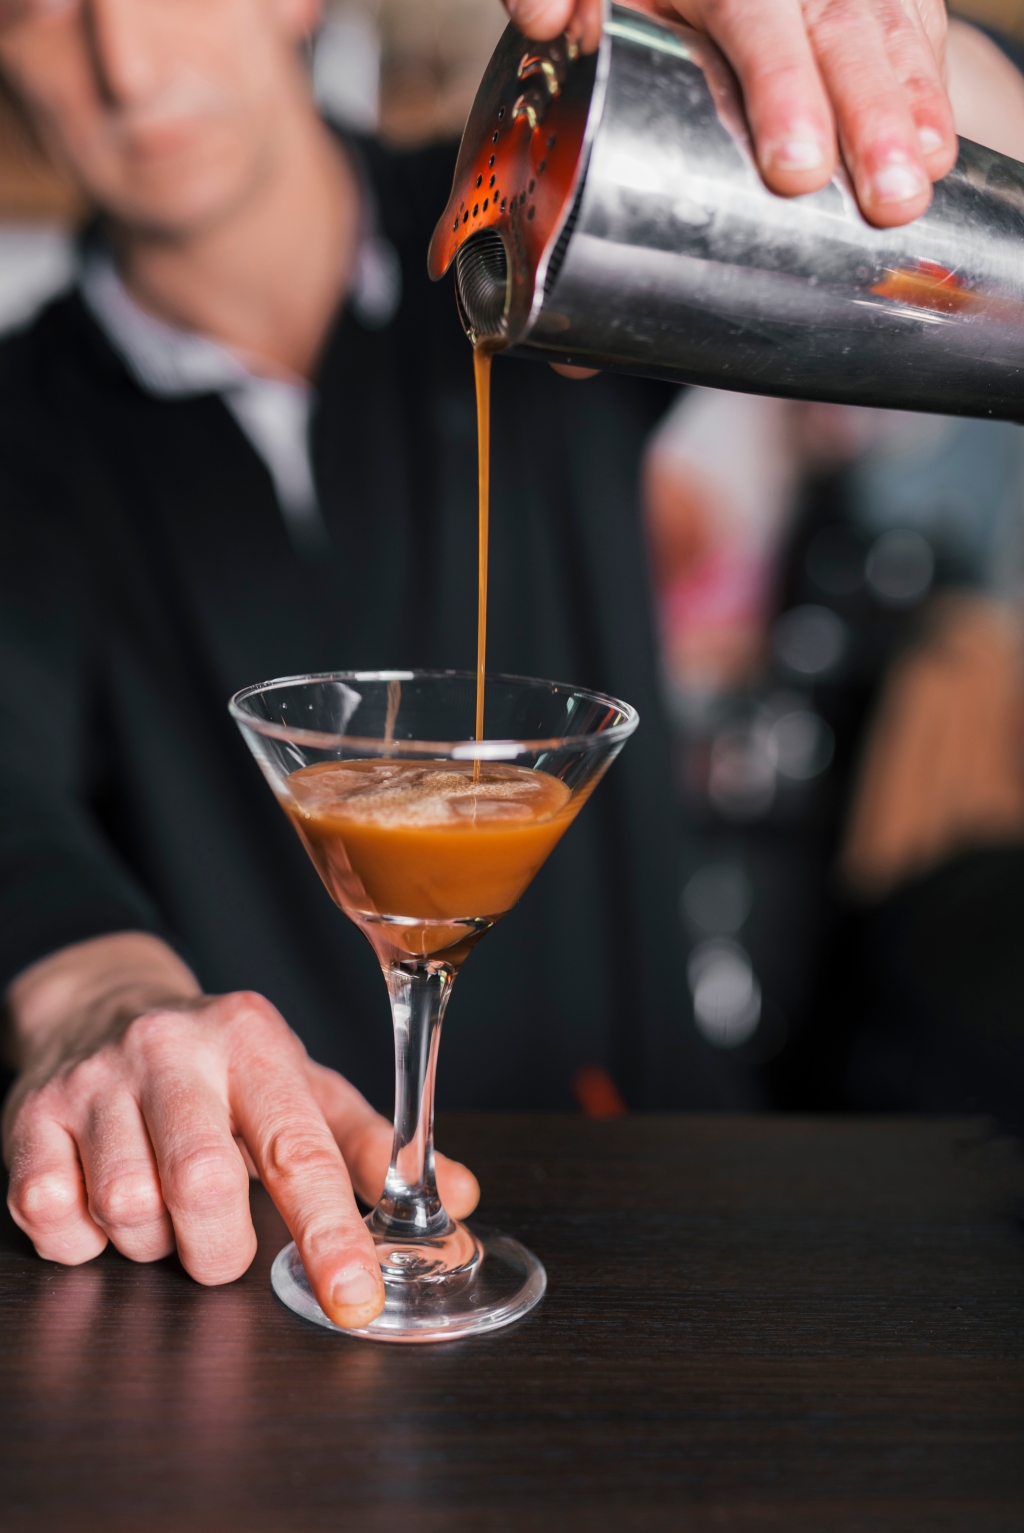 Hire Temporary Bartenders in Minutes